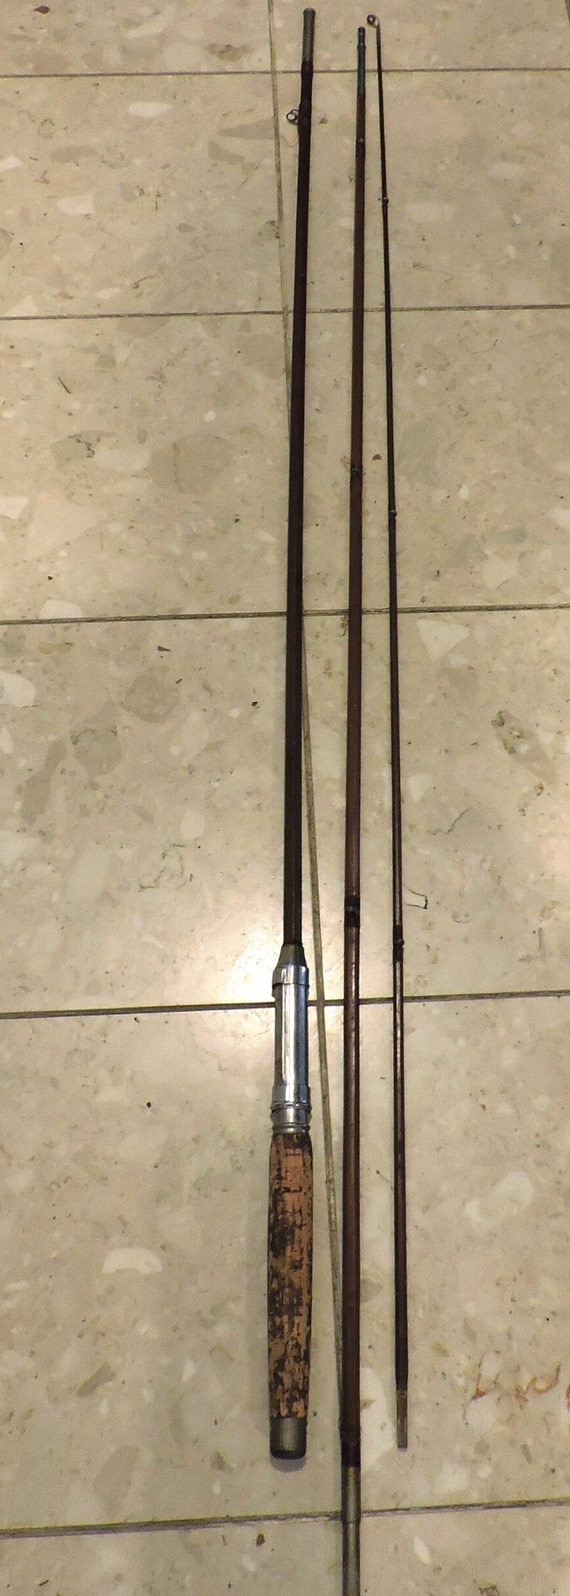 Old bamboo rods : r/flyfishing